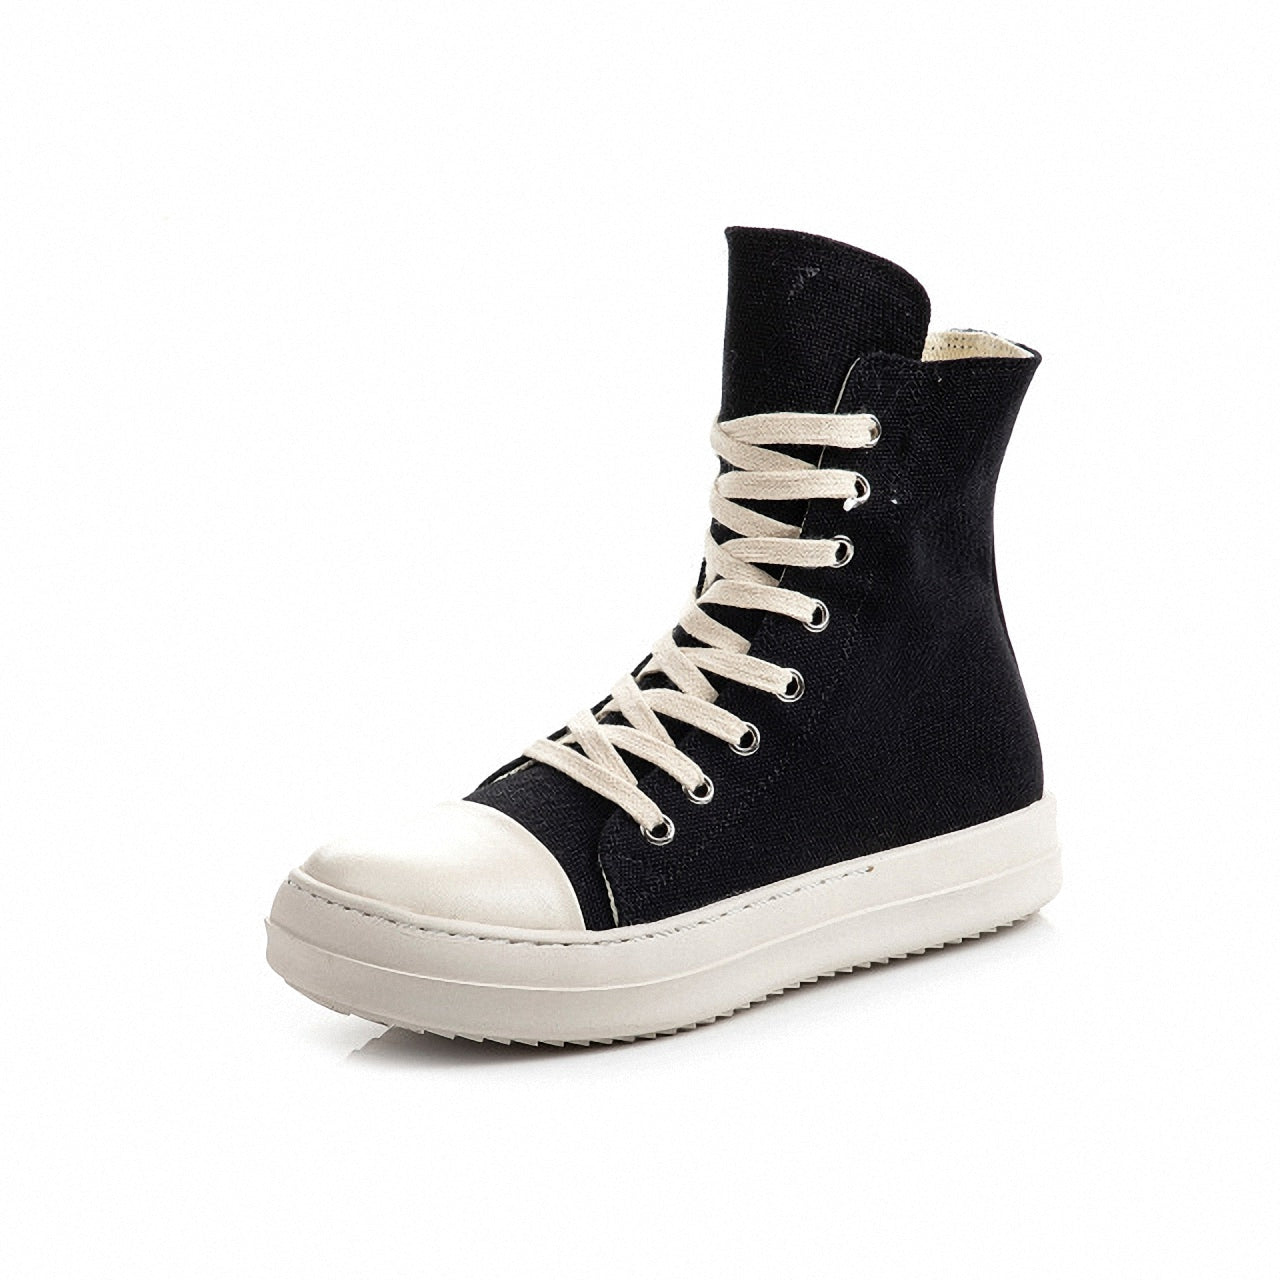 High top sneakers / Shoes for Rock lovers / Retro platform Alternative Fashion Unisex Shoes - HARD'N'HEAVY